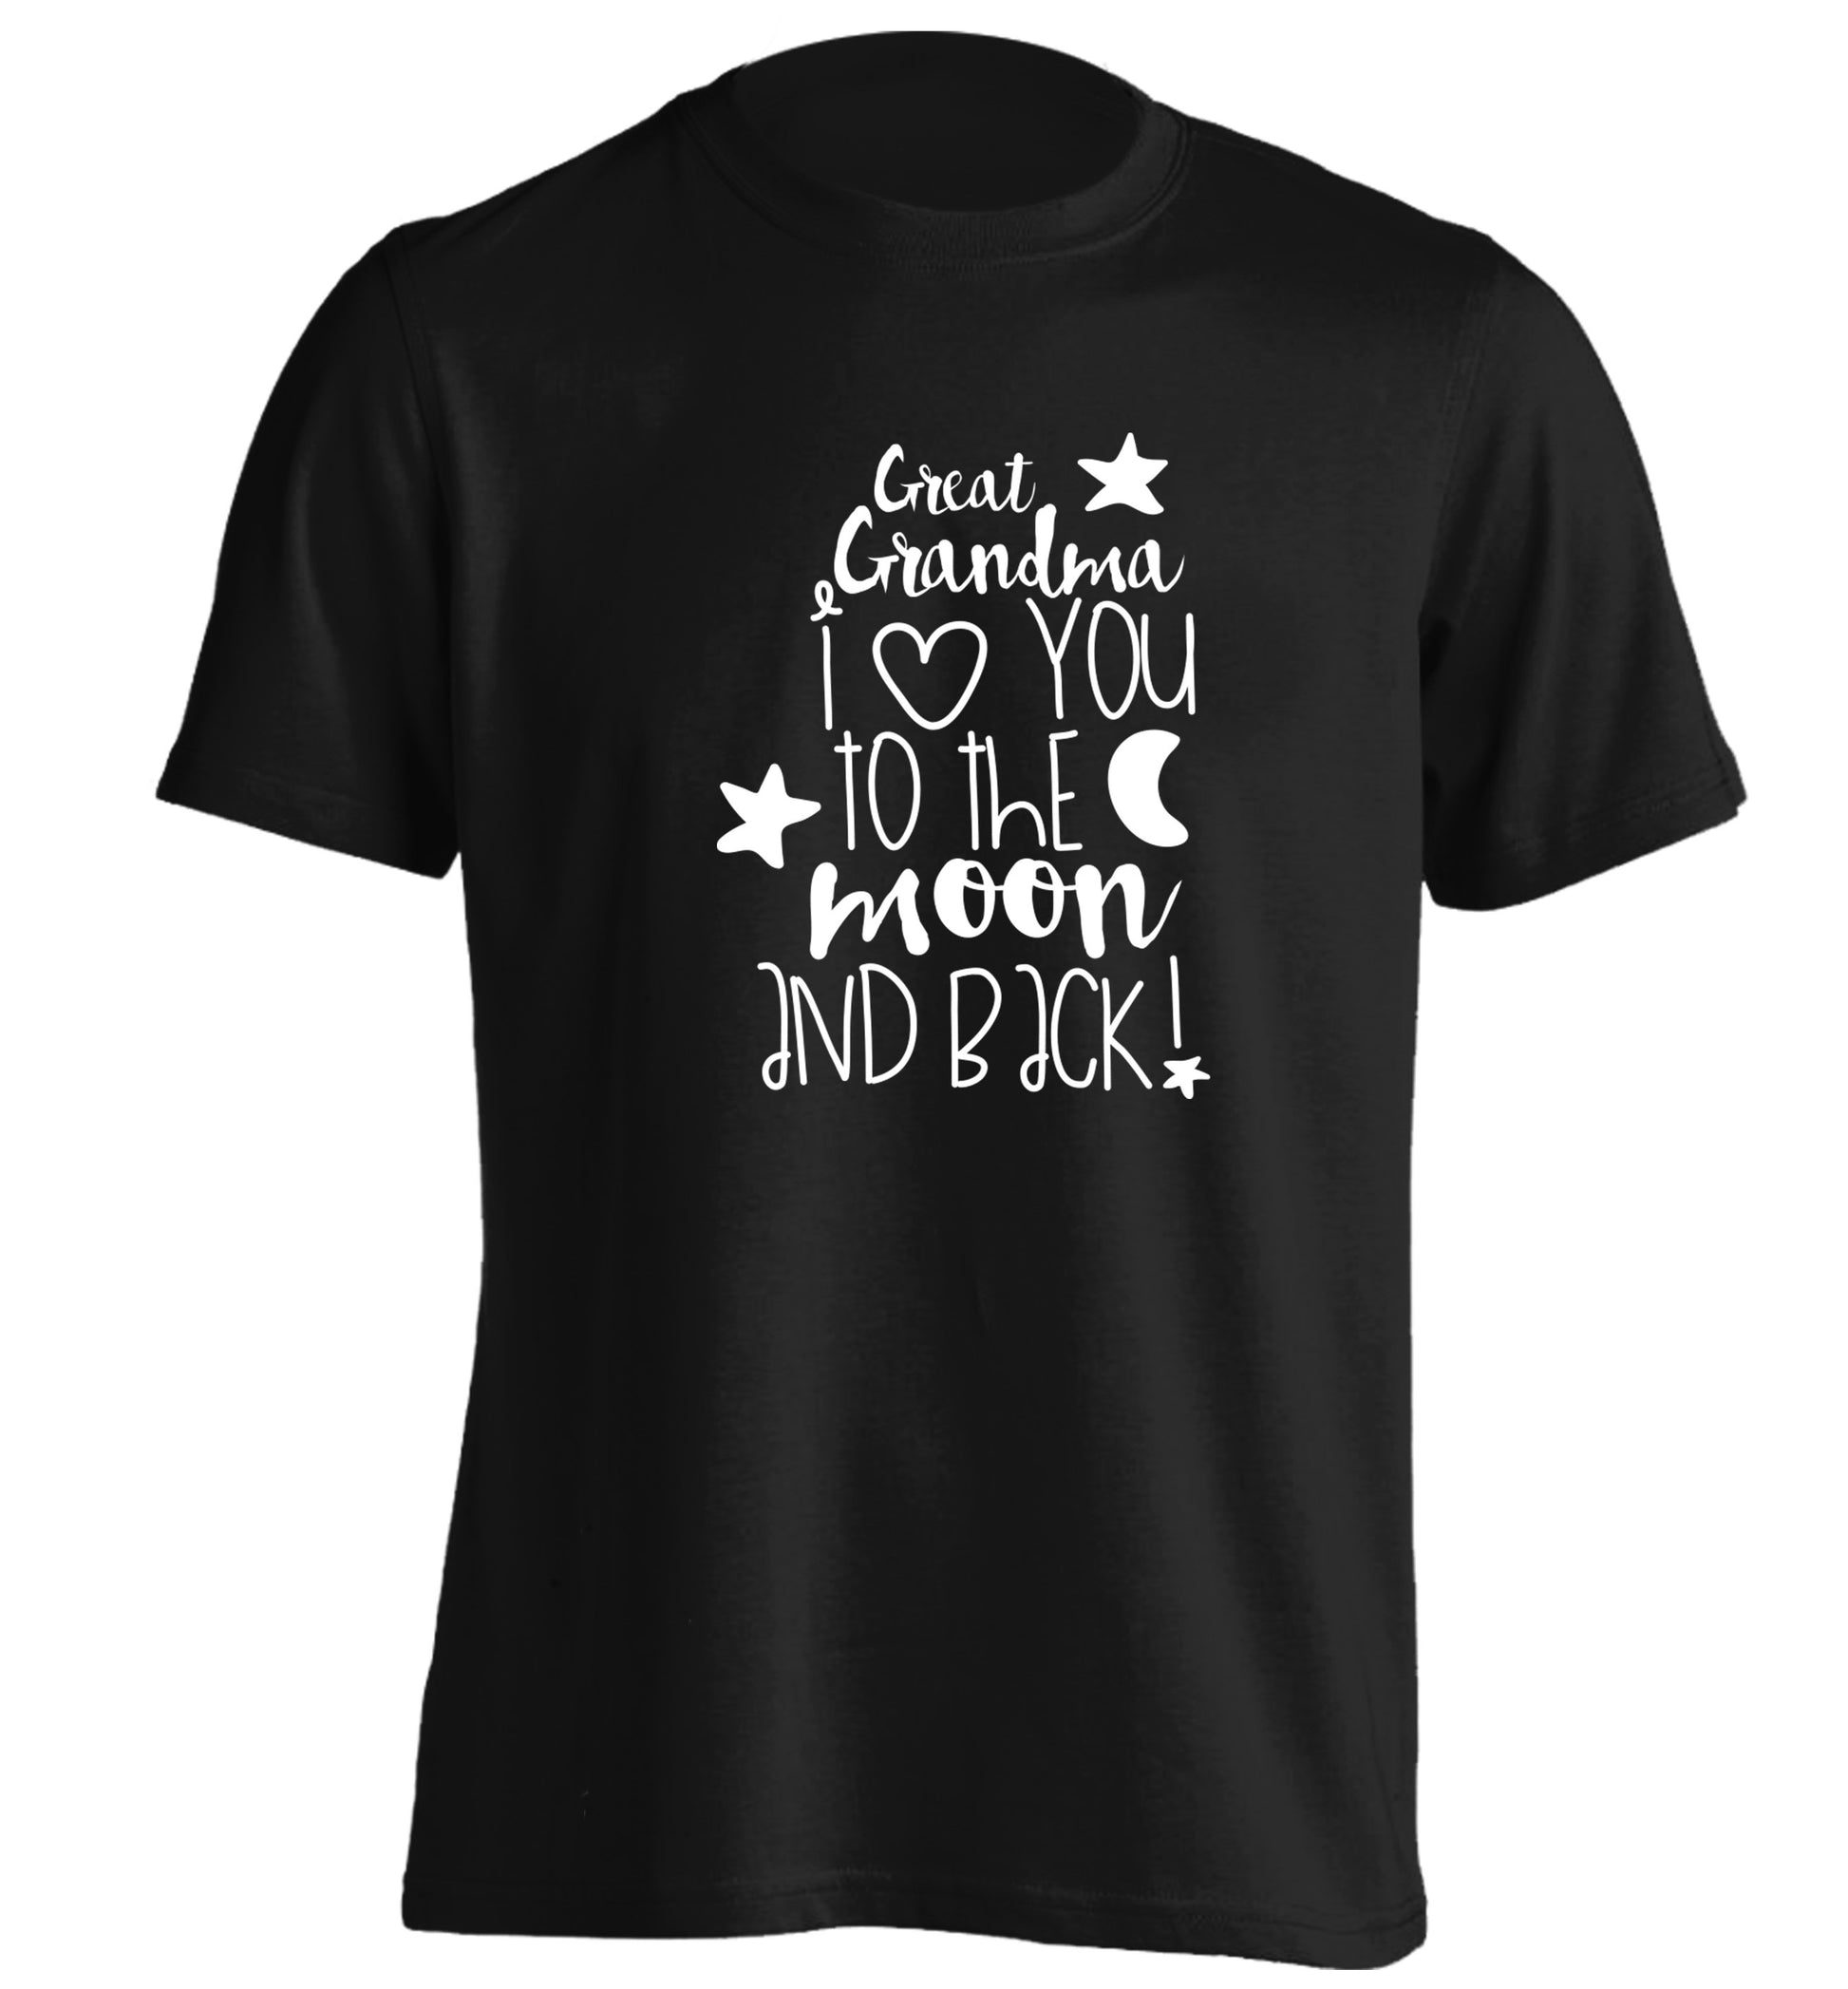 Great Grandma I love you to the moon and back adults unisex black Tshirt 2XL